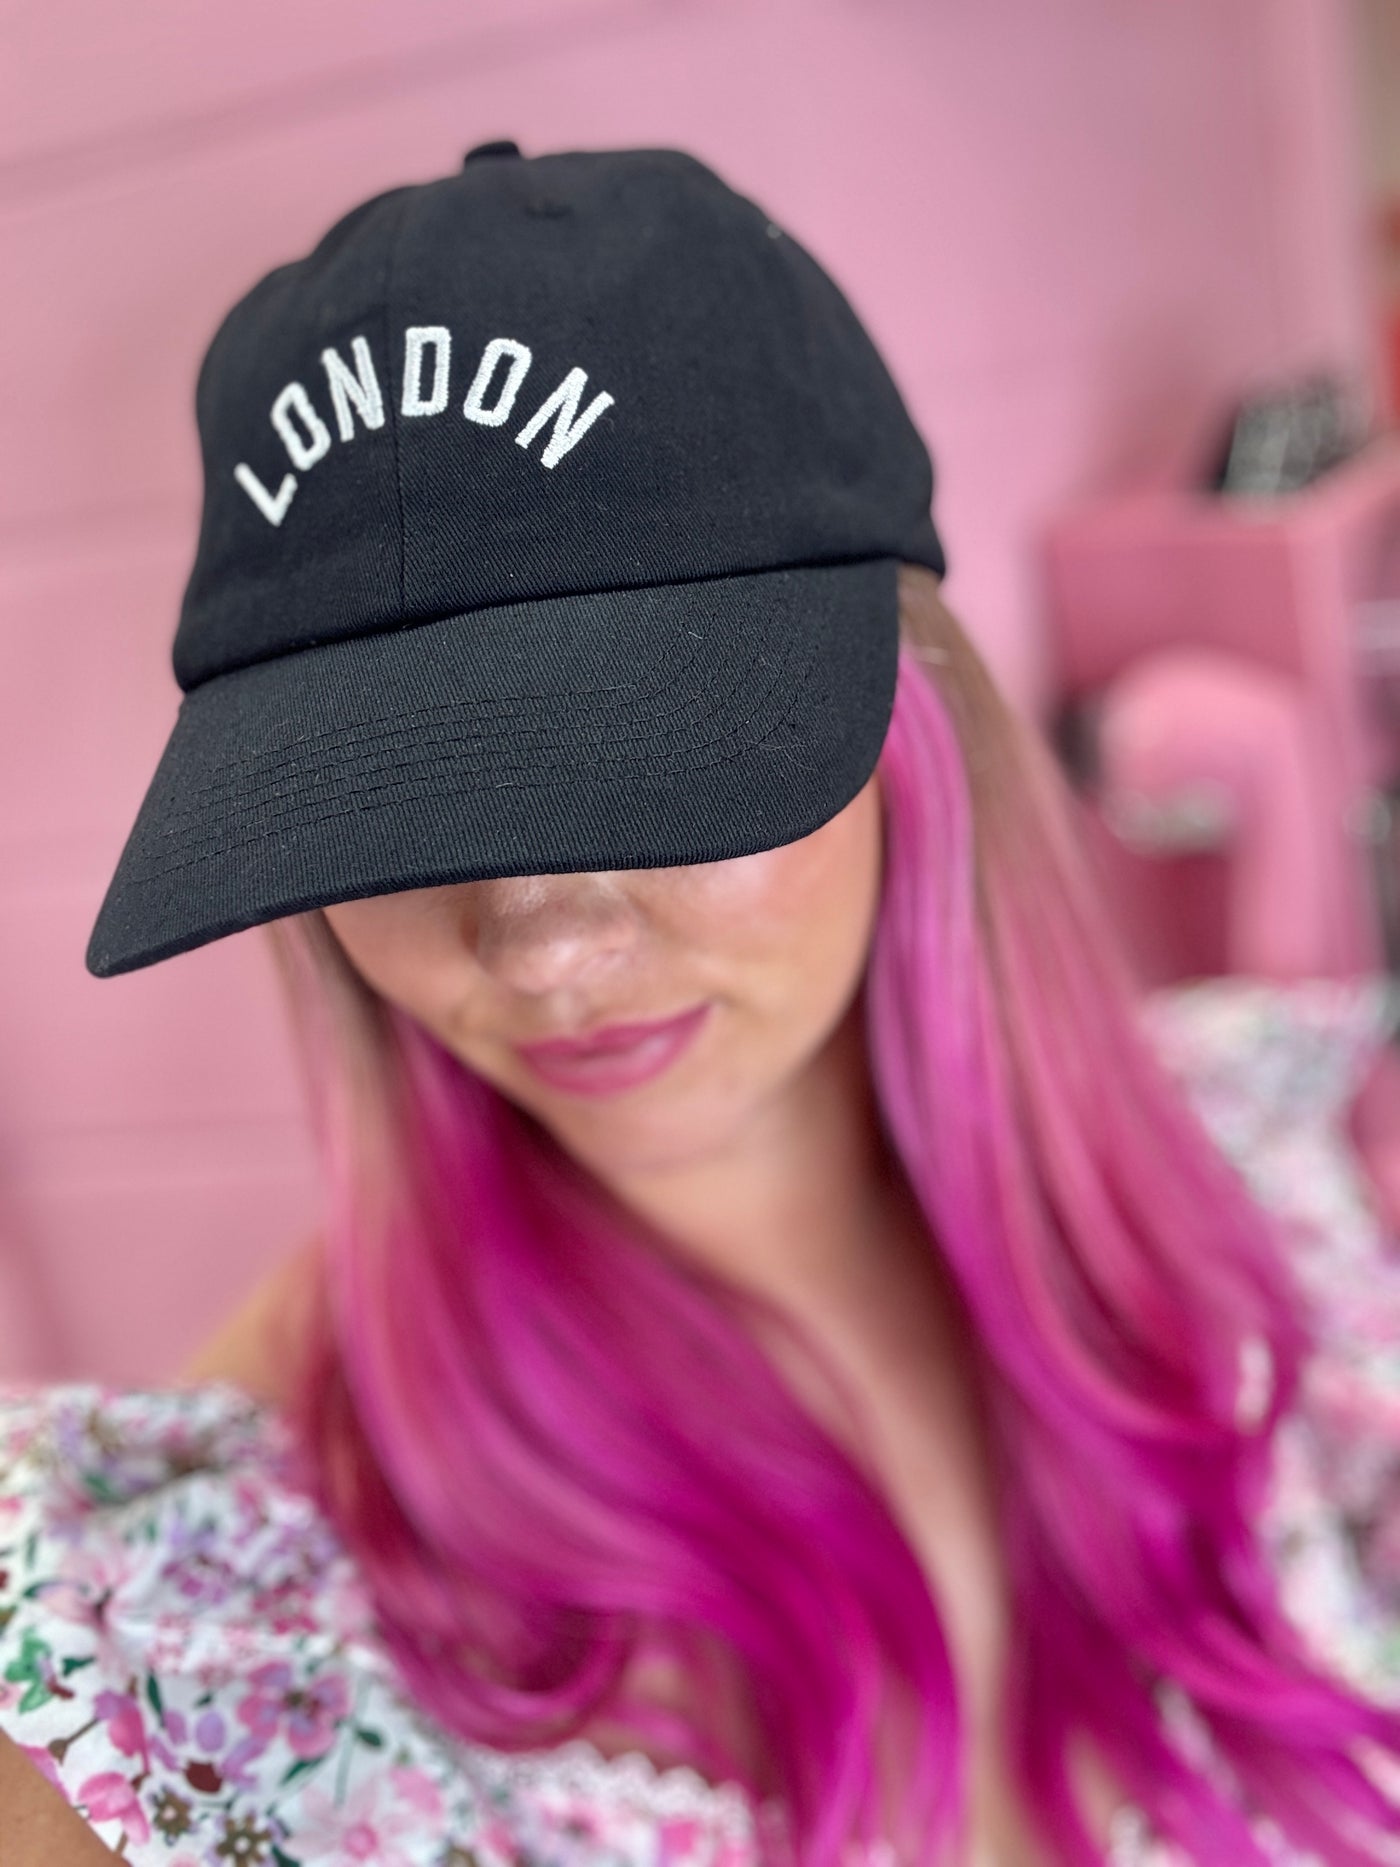 Embroidered City Cap